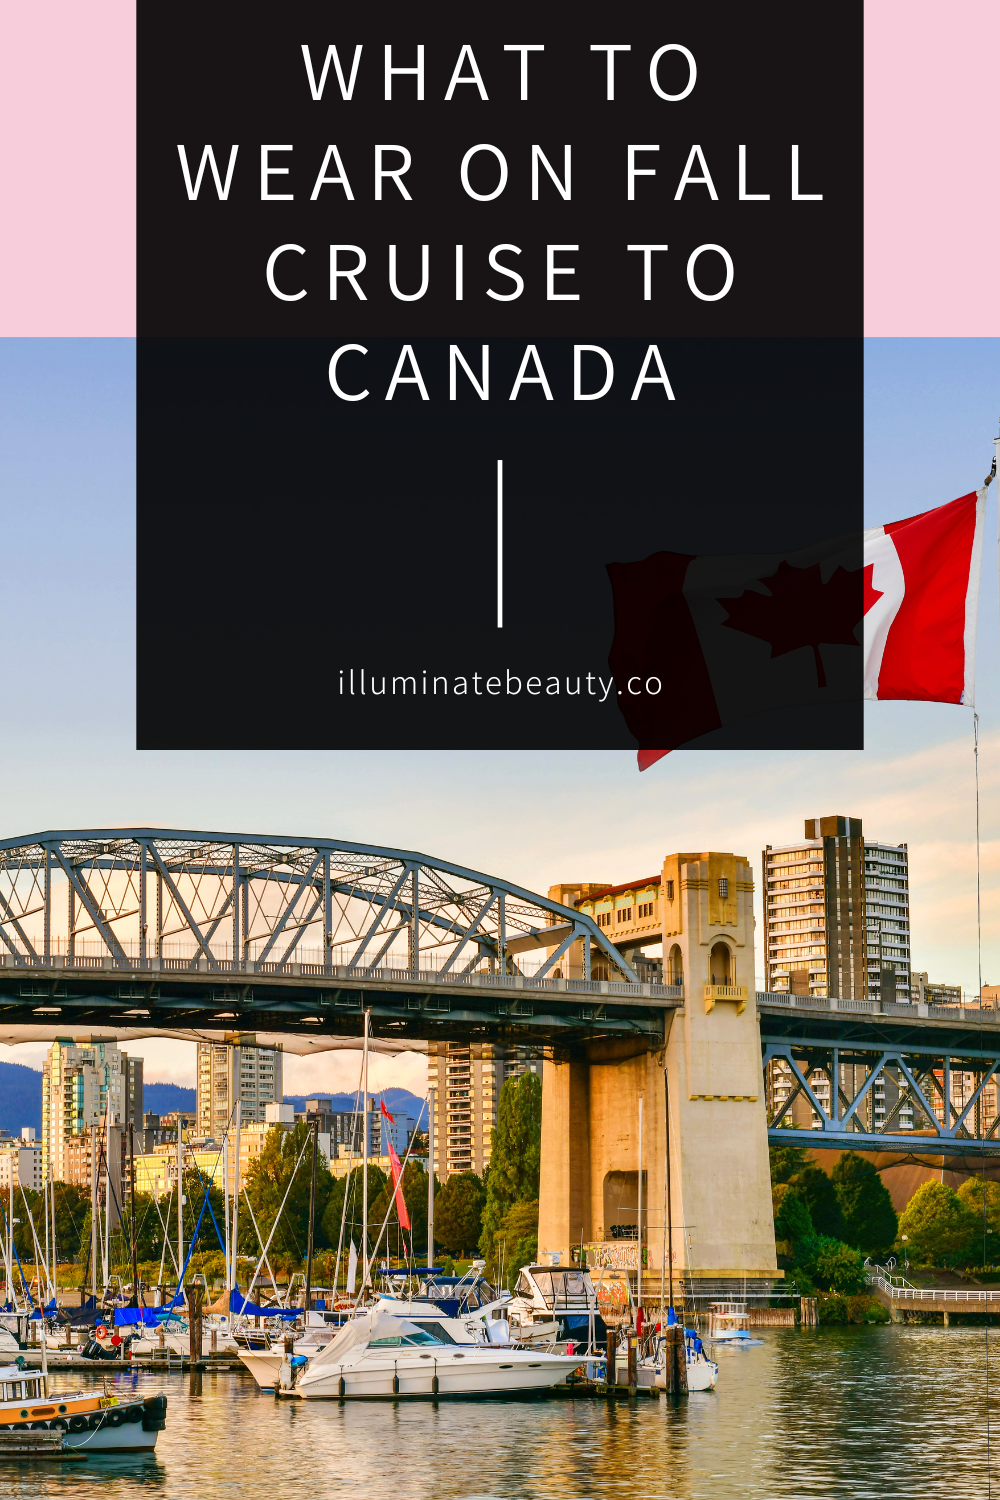 What to Wear on Fall Cruise to Canada